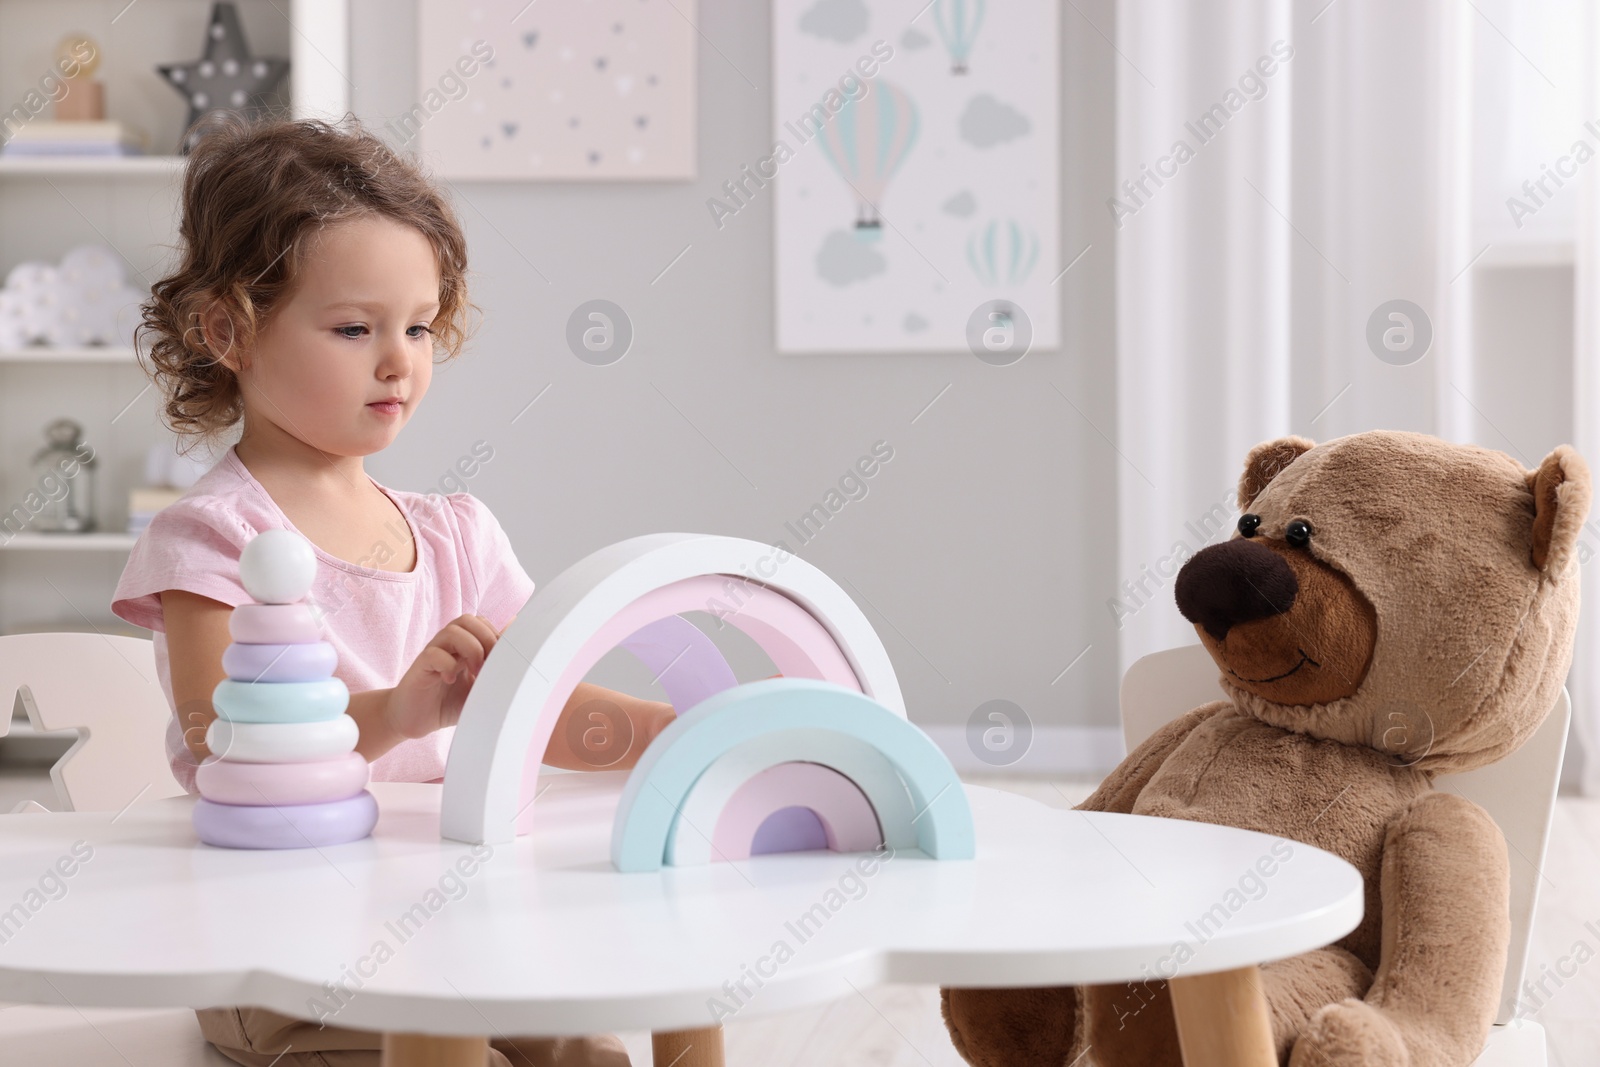 Photo of Cute little girl playing with toy and teddy bear at white table in room